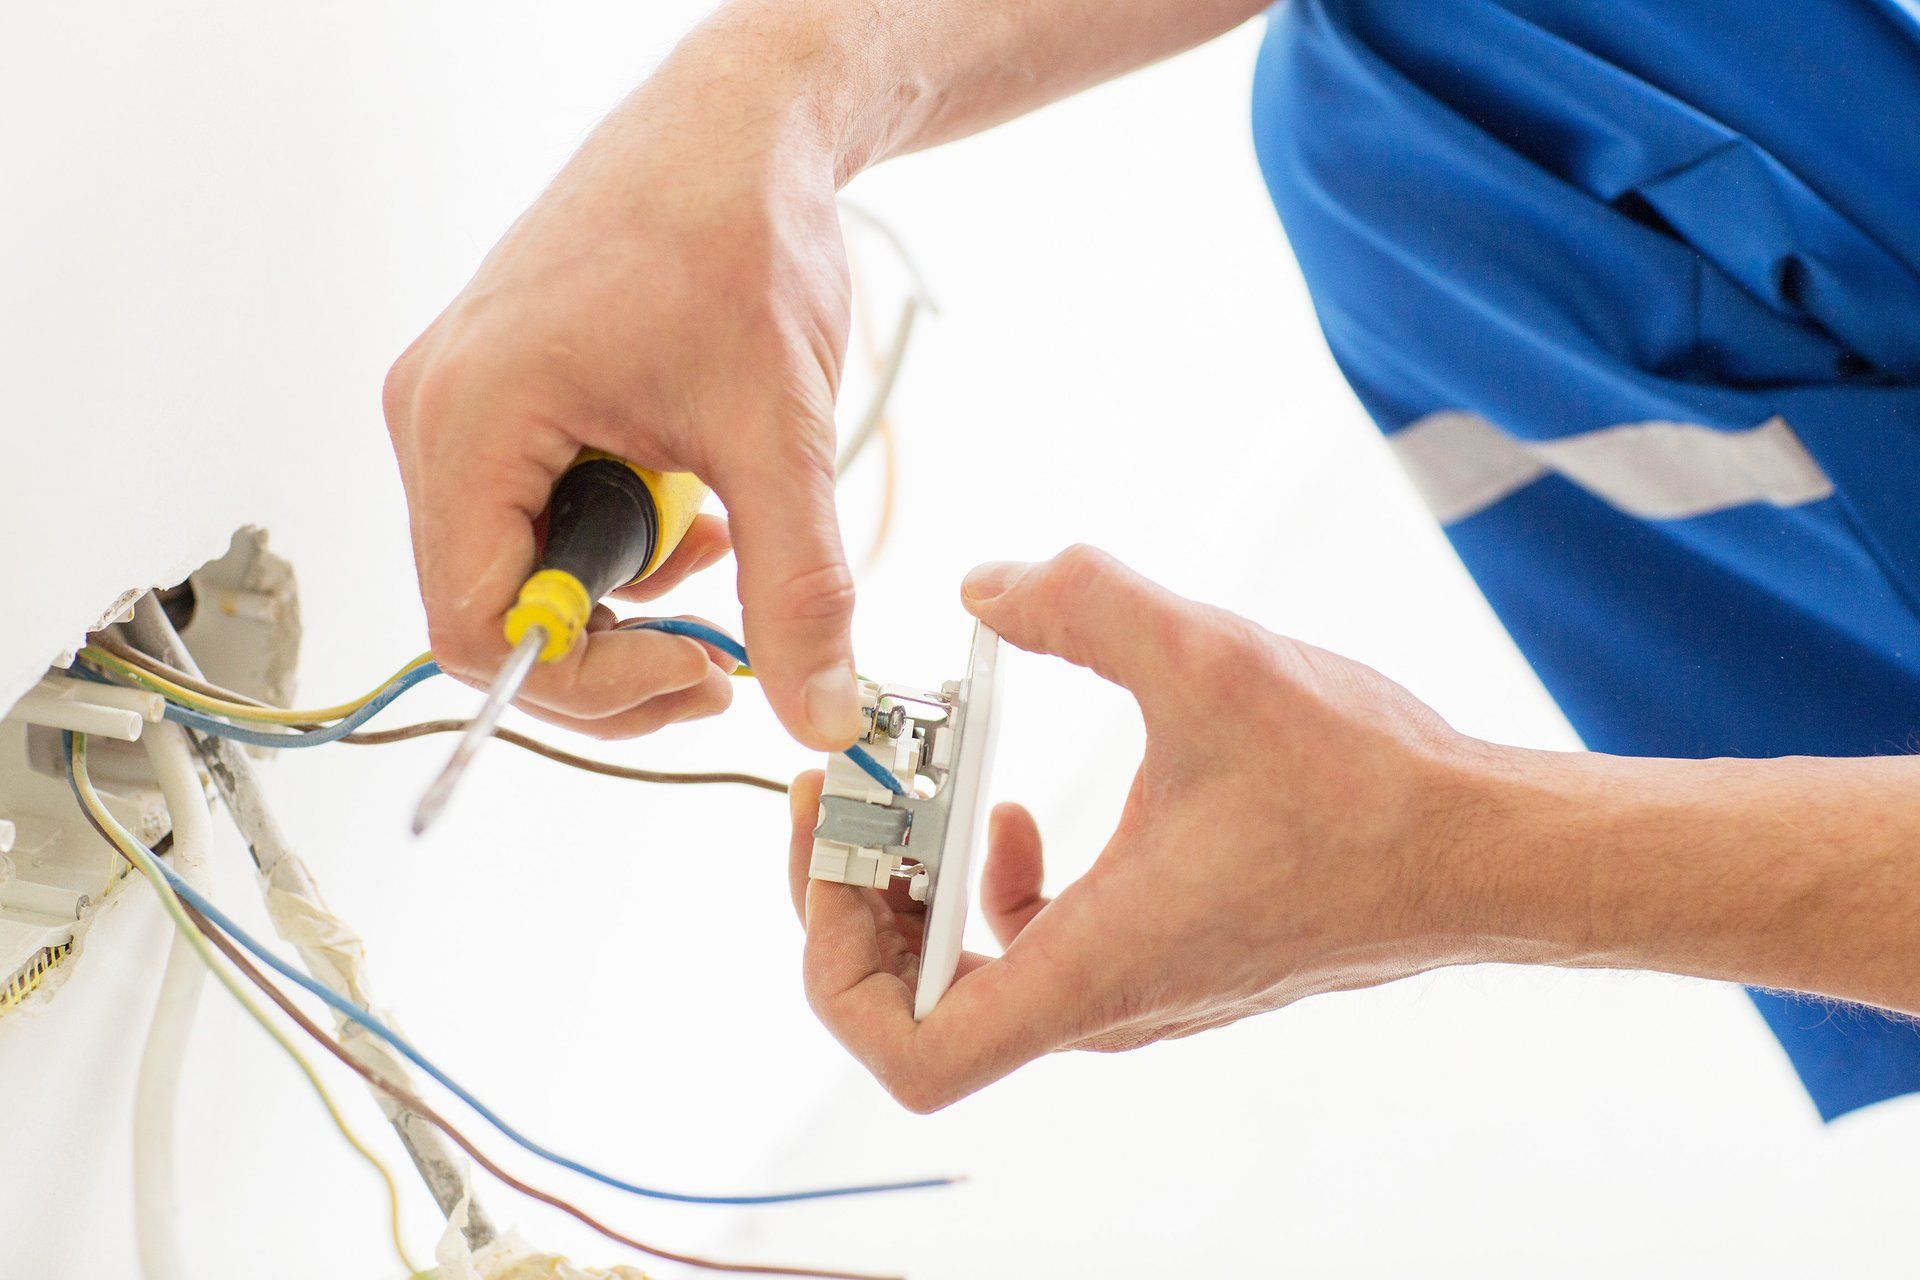 Domestic Electricians in Dublin and Wicklow